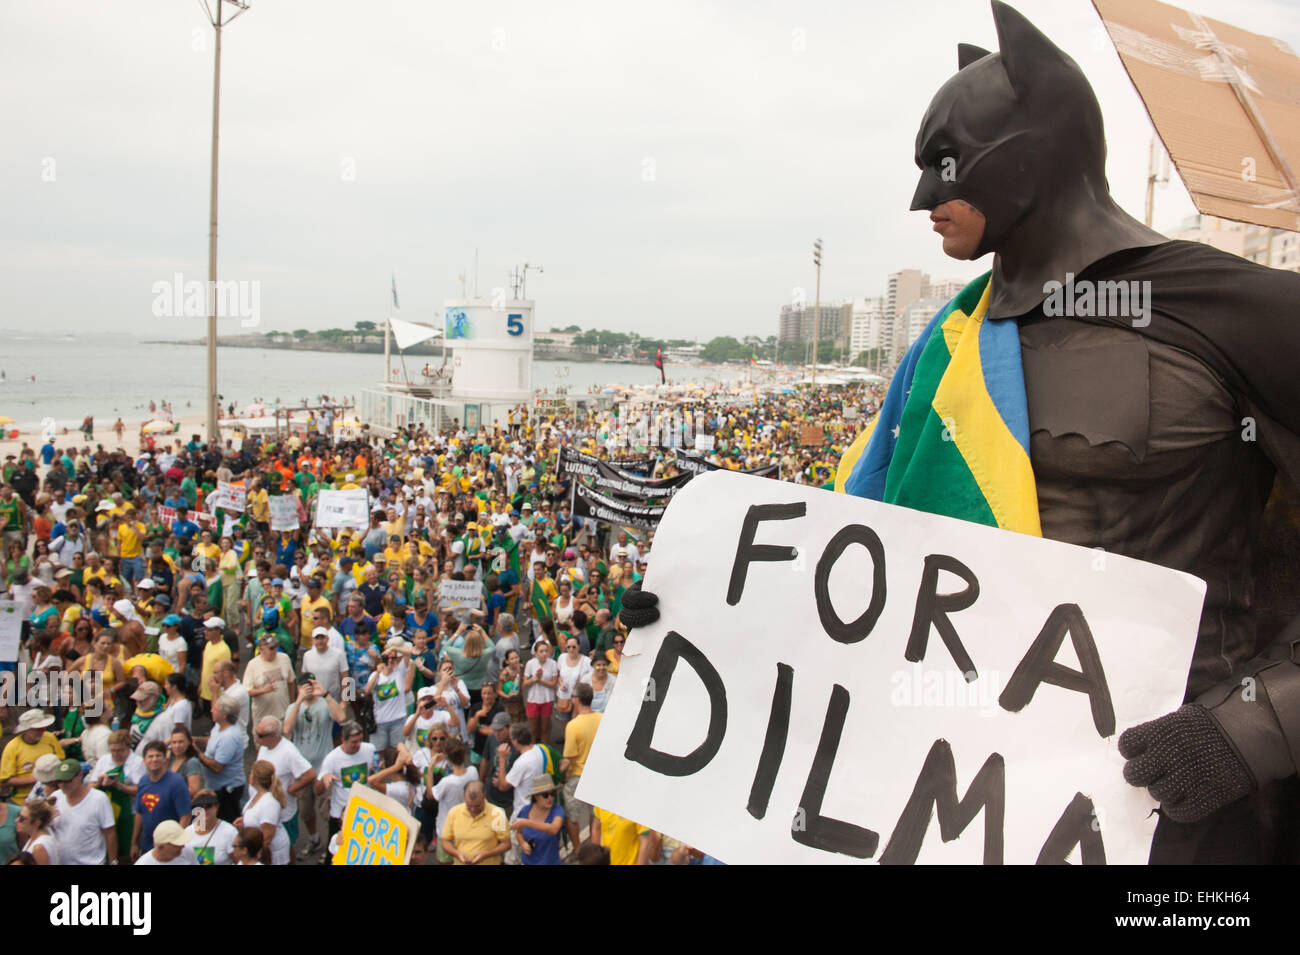 Protestor dressed in a Batman costume with placard saying 'FORA DILMA' (Dilma Out). Rio de Janeiro, Brazil. Demonstration against President Dilma Rousseff. Stock Photo